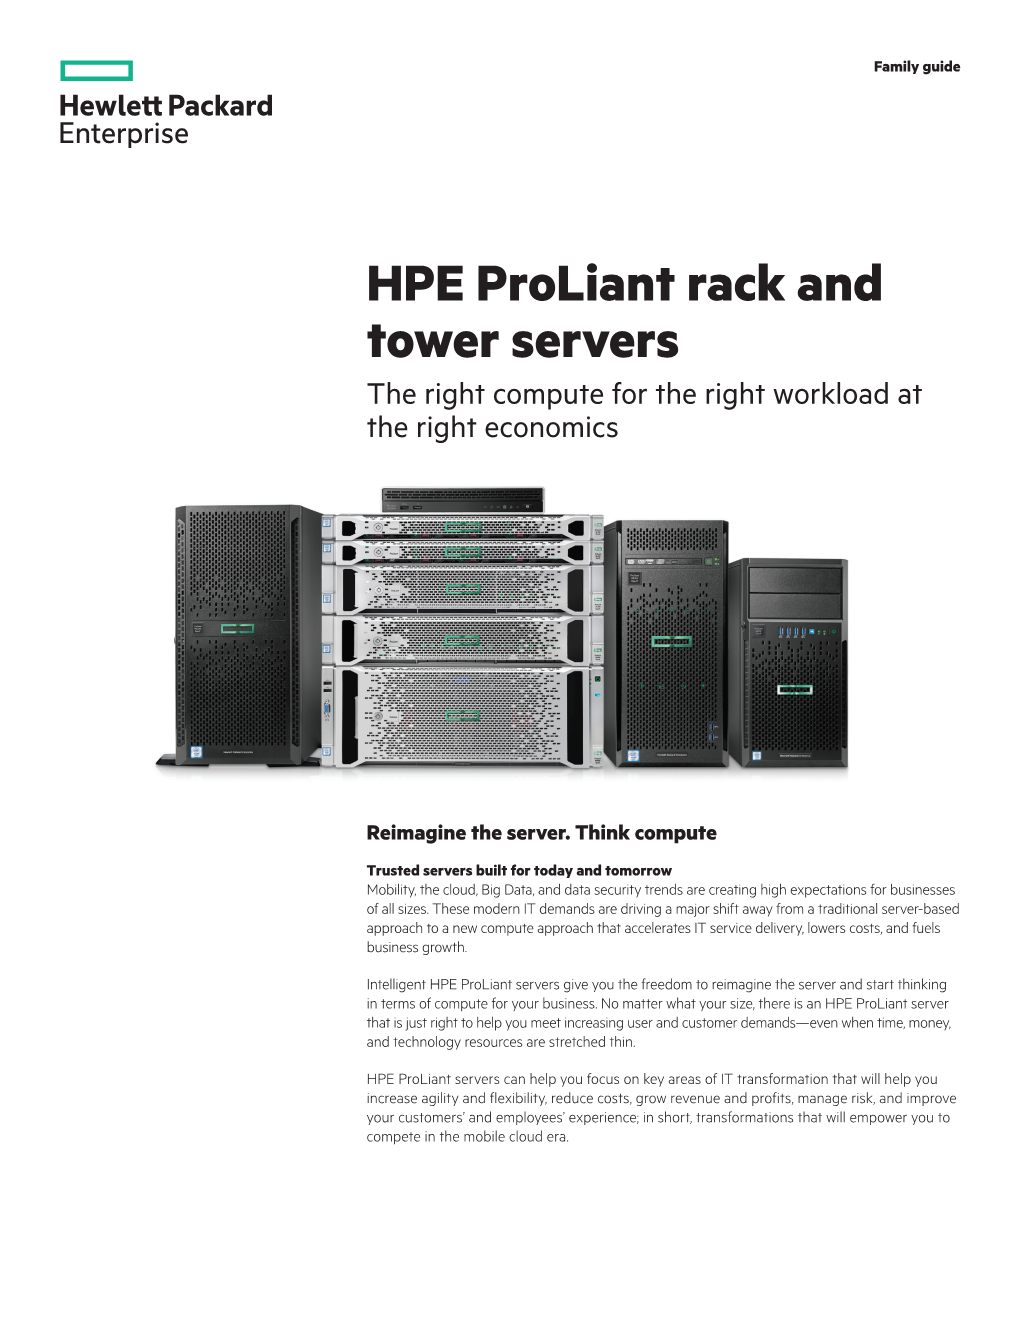 HPE Proliant Rack and Tower Servers: the Right Compute for the Right